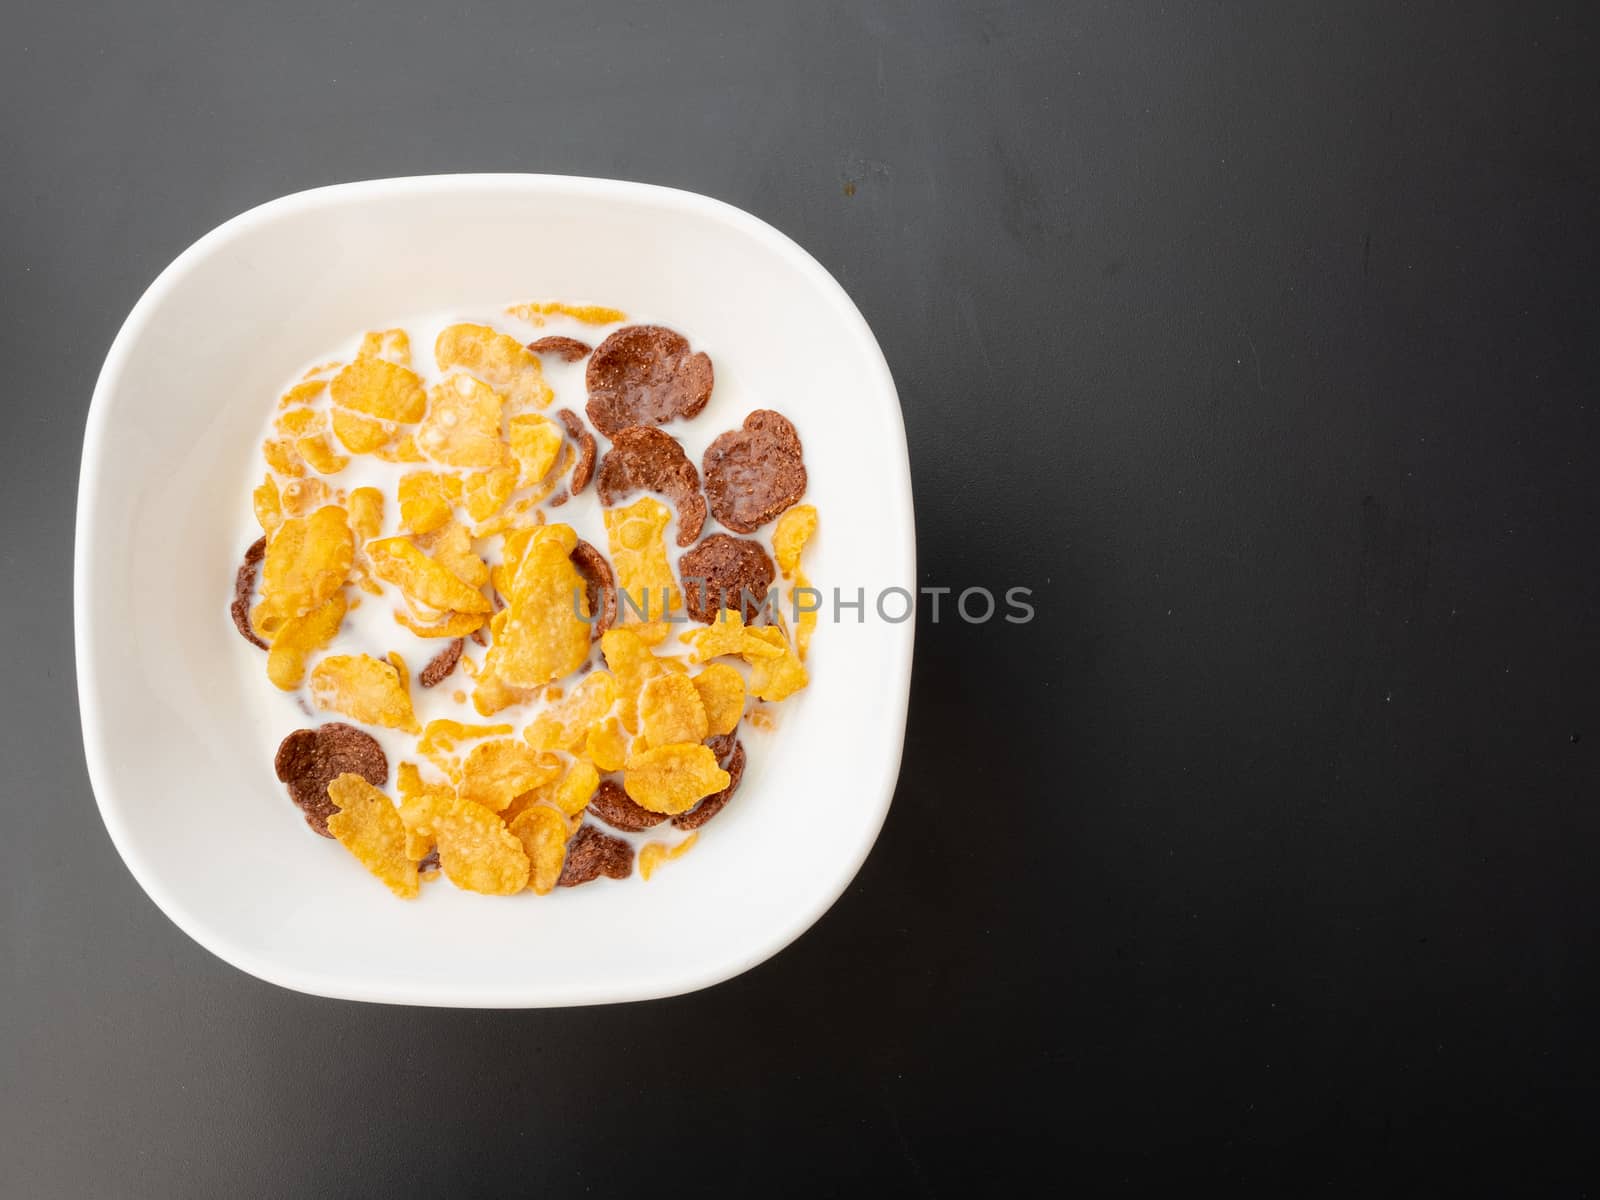 Breakfast is ready to be eaten in a white bowl consisting of cornflakes, crispy chocolate, and milk, placed on a black painted metal dining table.